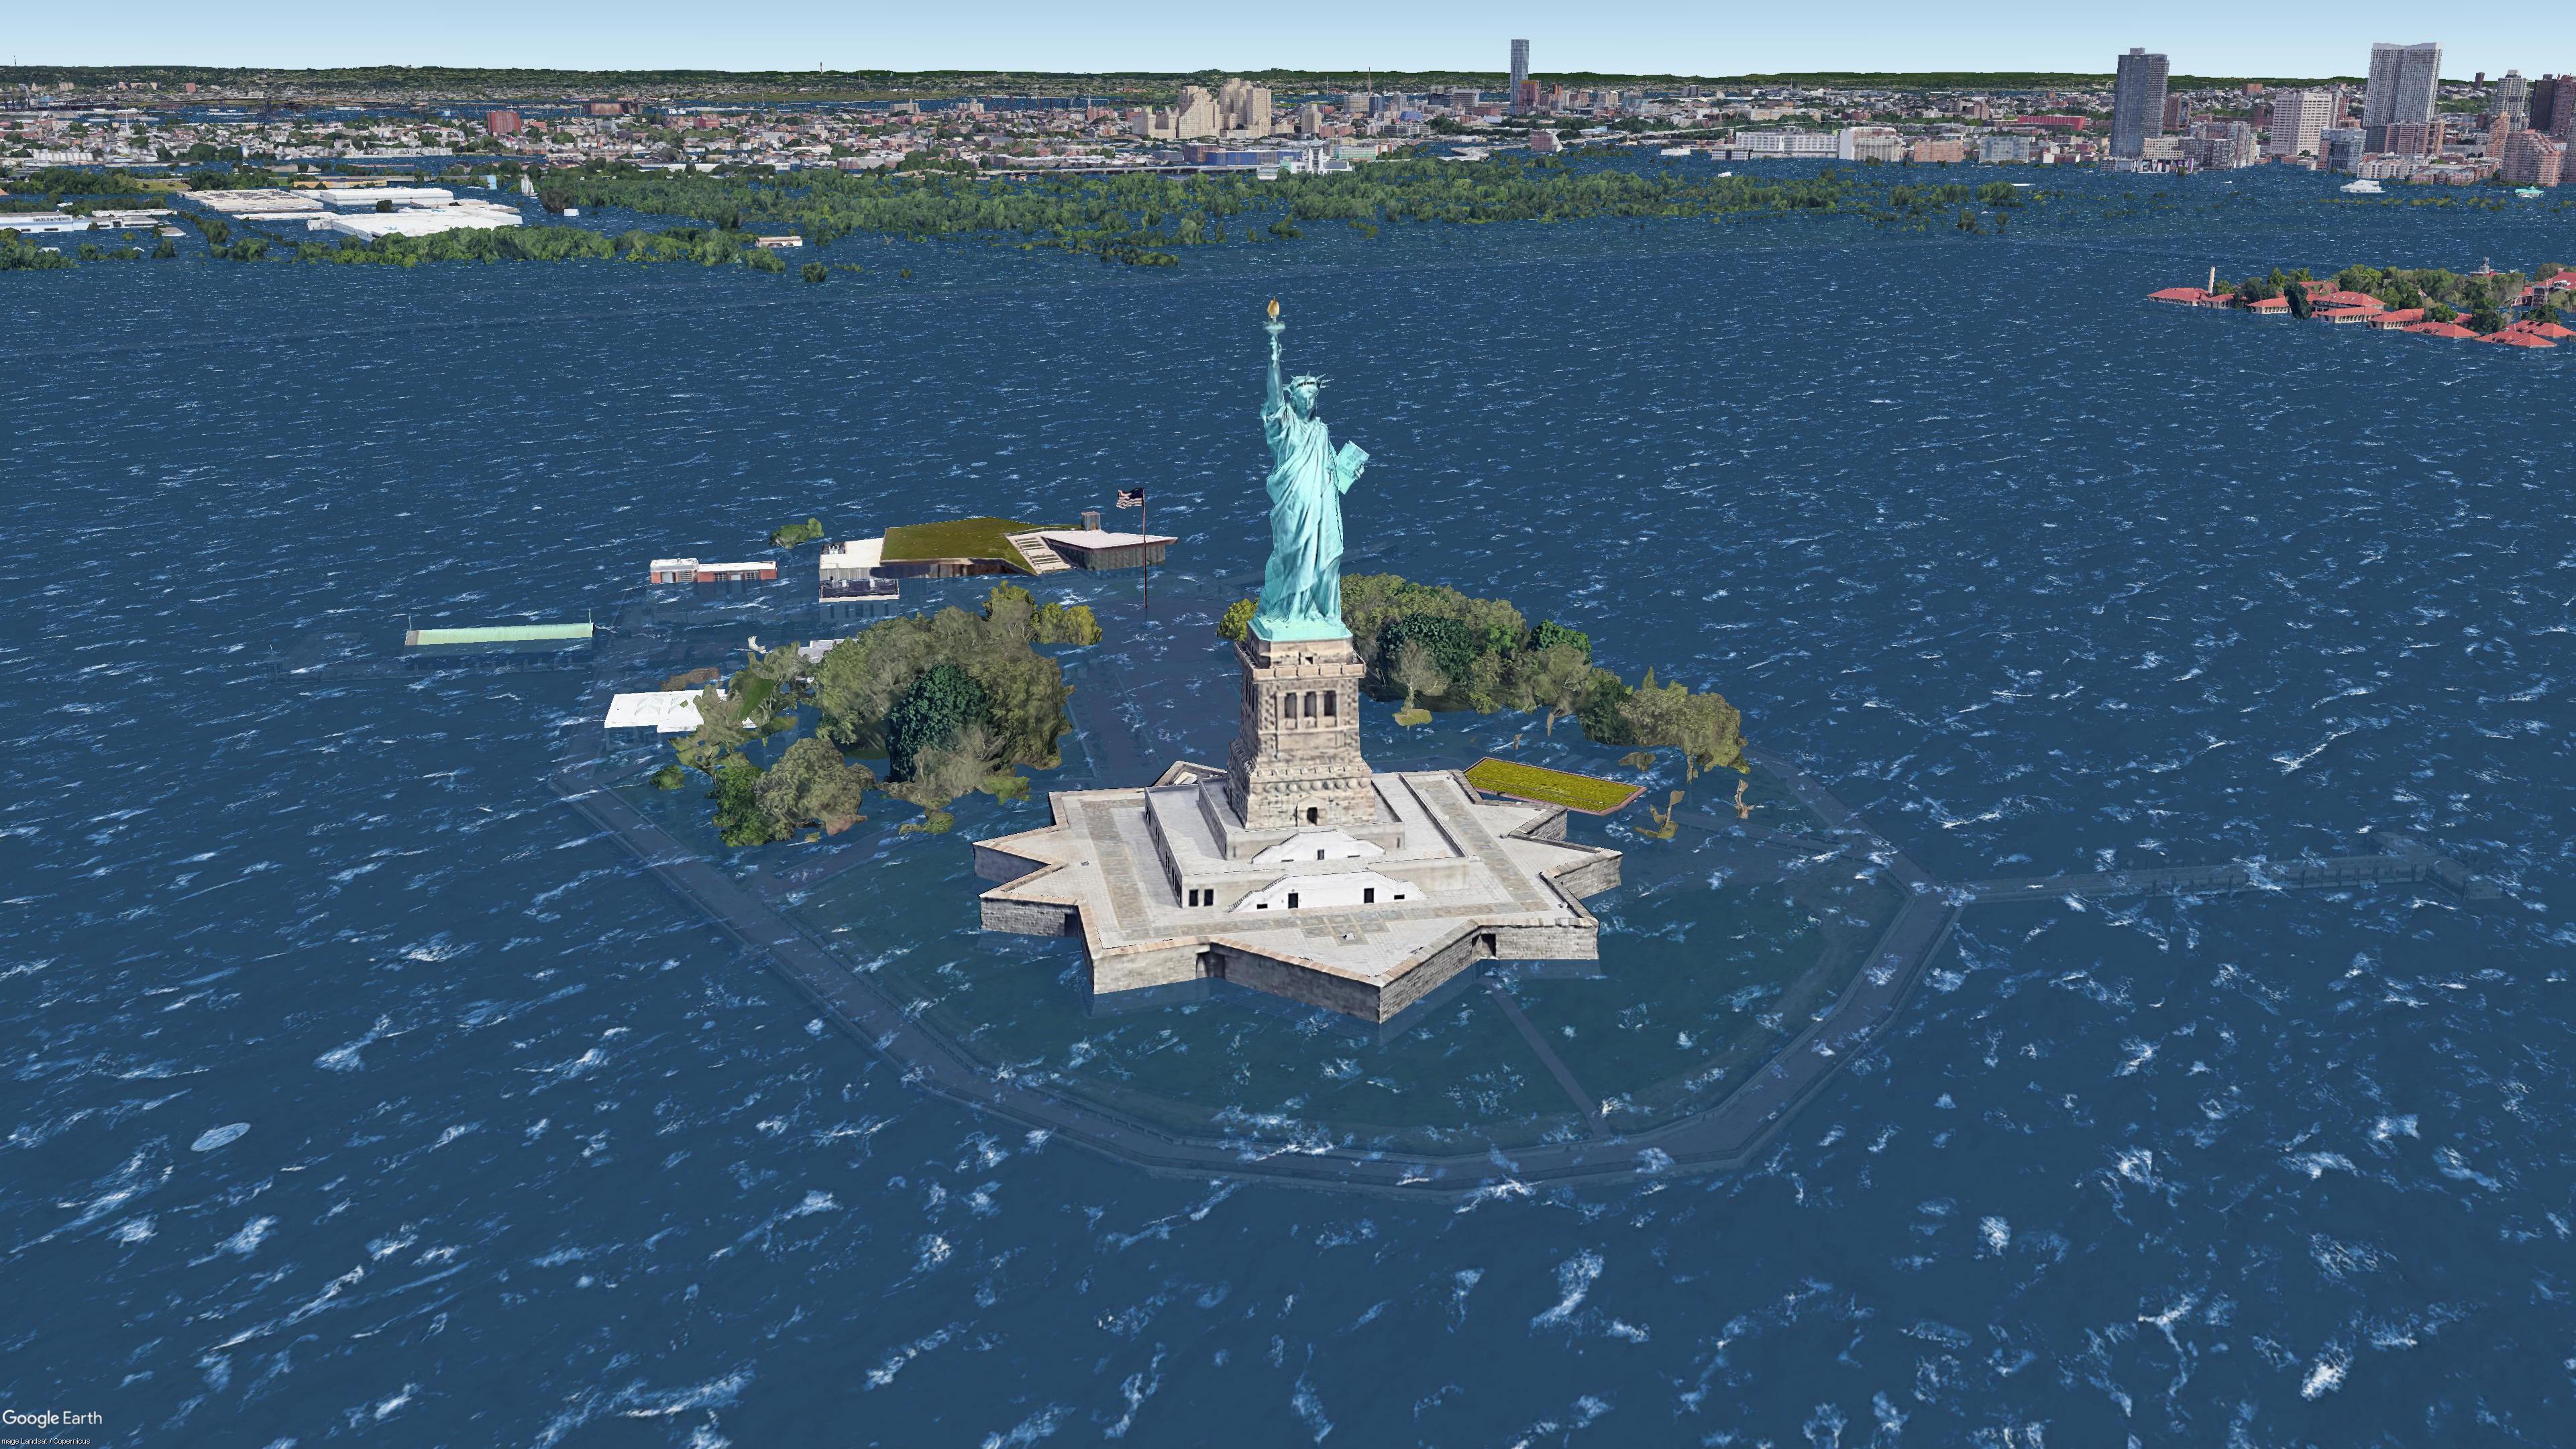 USA__NY__New_York__Statue_Of_Liberty_National_Monument__L13__3p0C.jpg